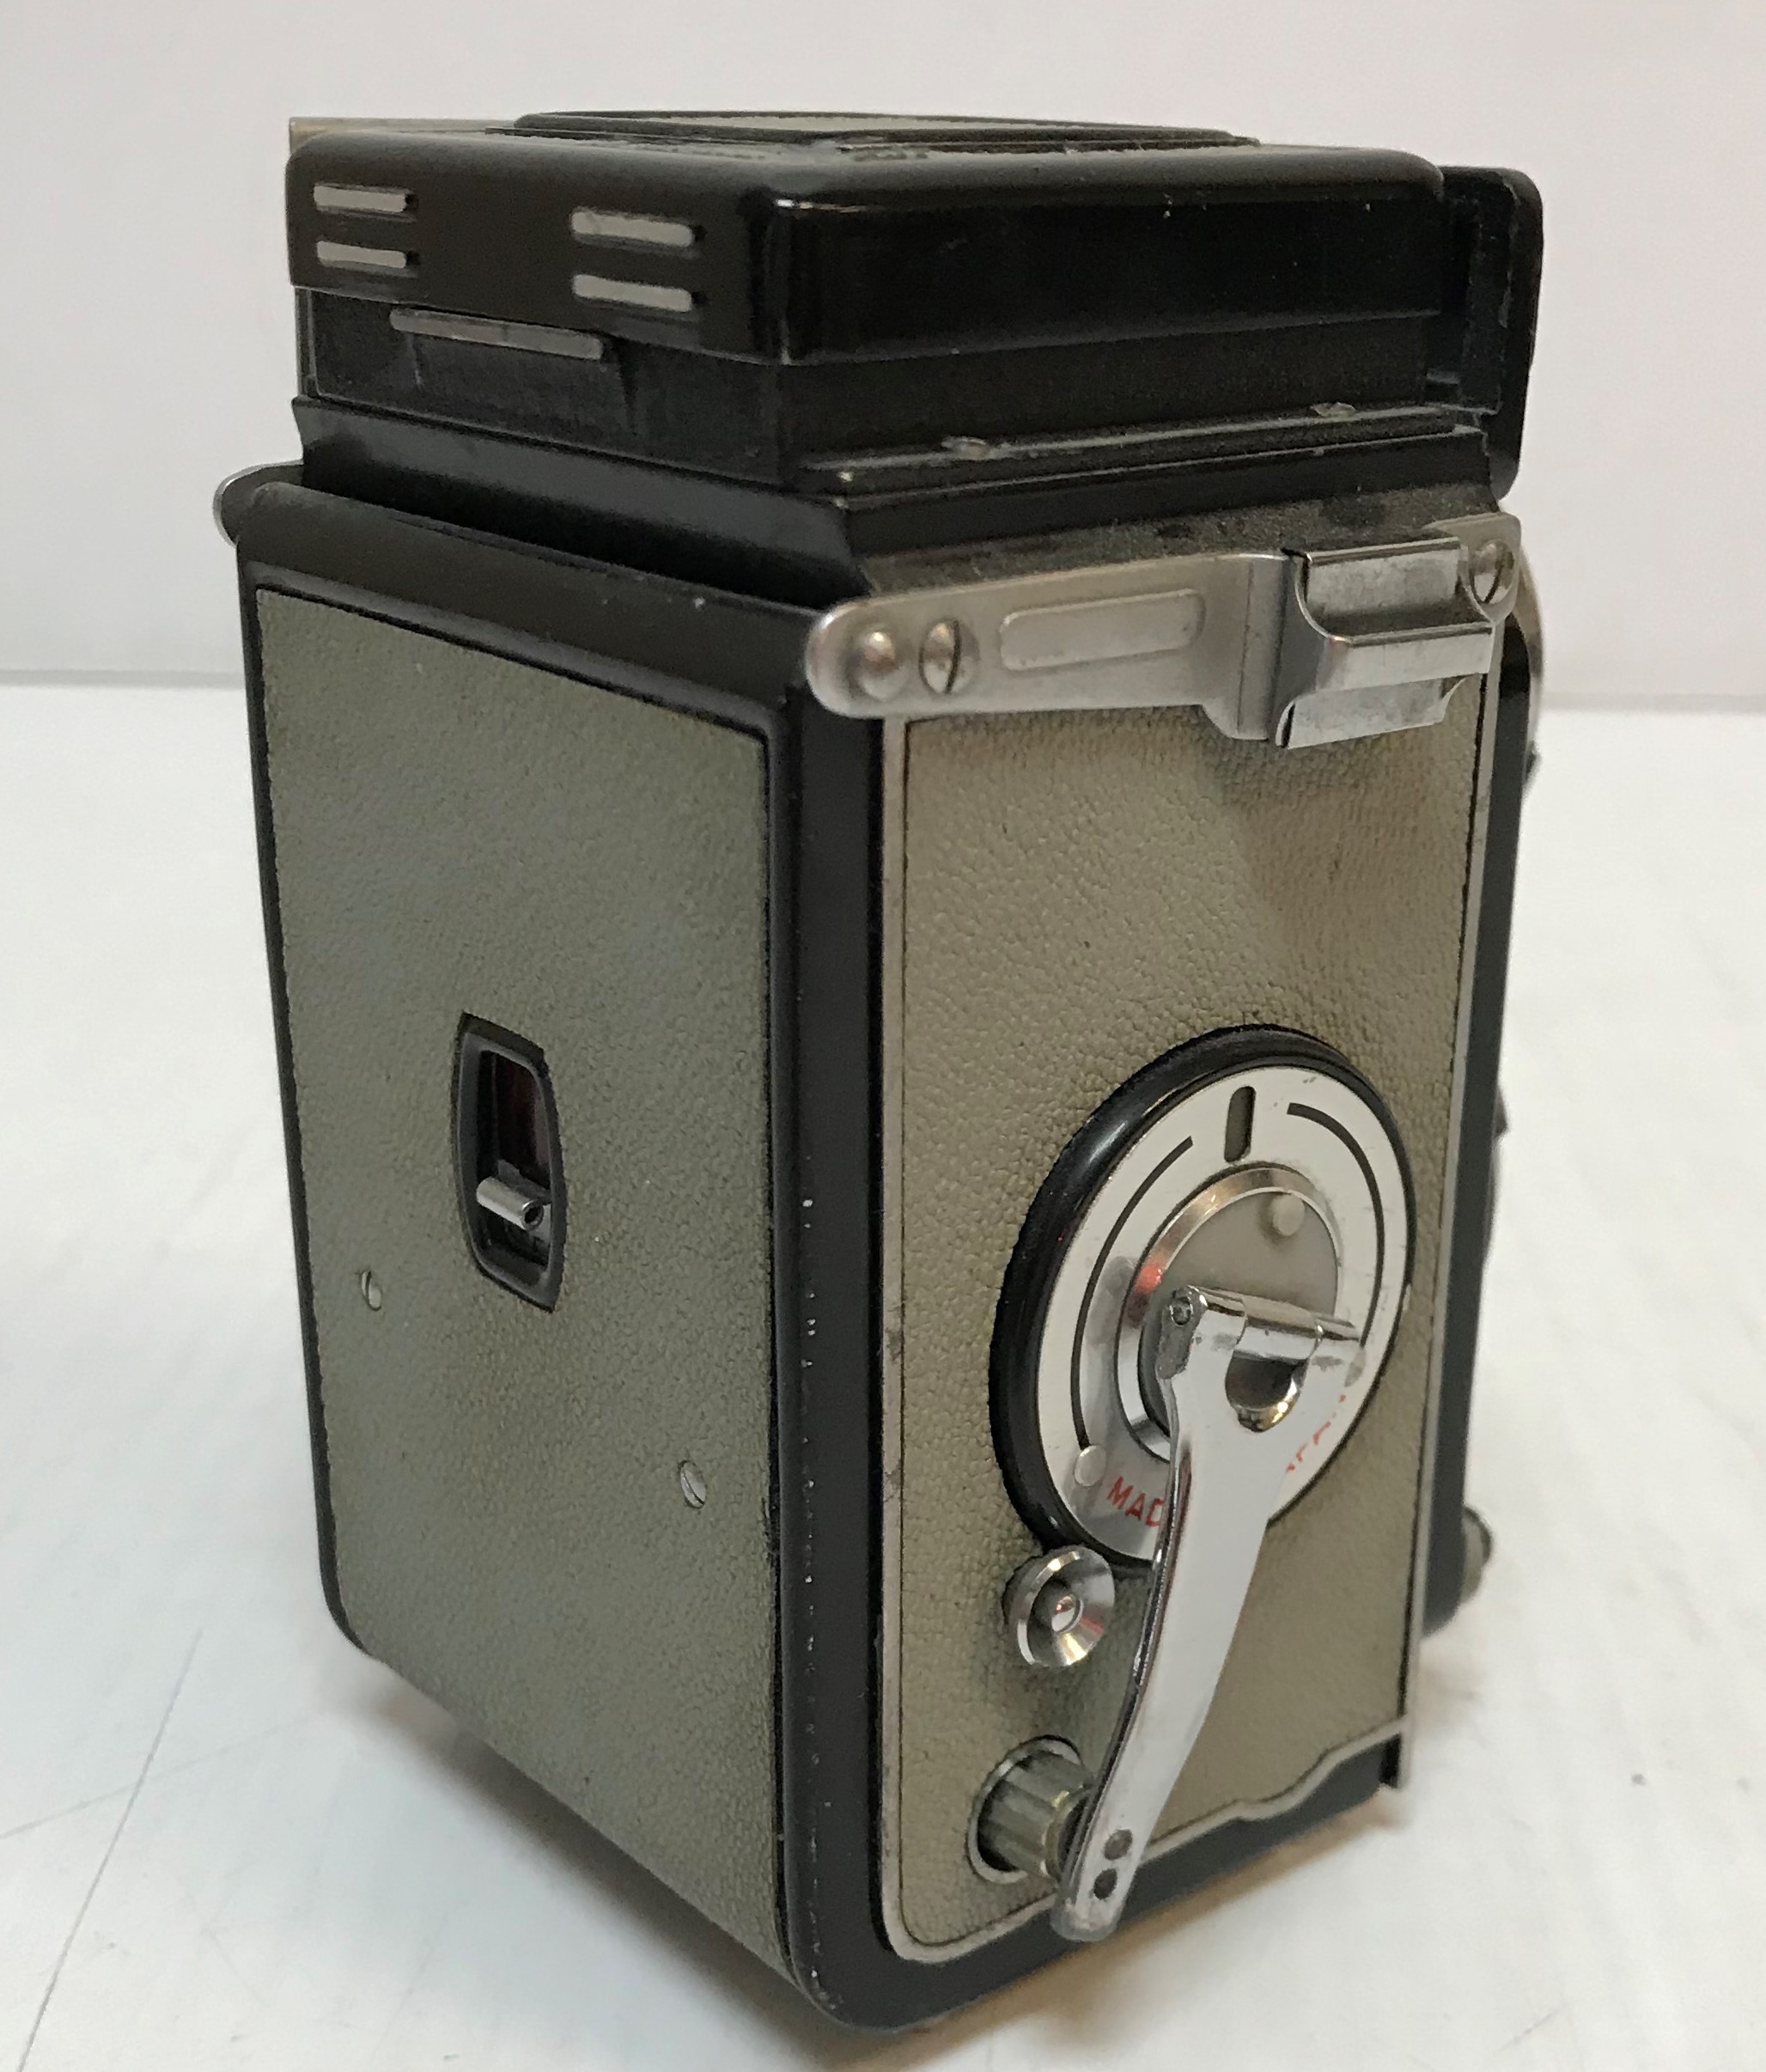 A Yashica 44 twin reflex camera, black and pale grey colourway (No. - Image 5 of 5